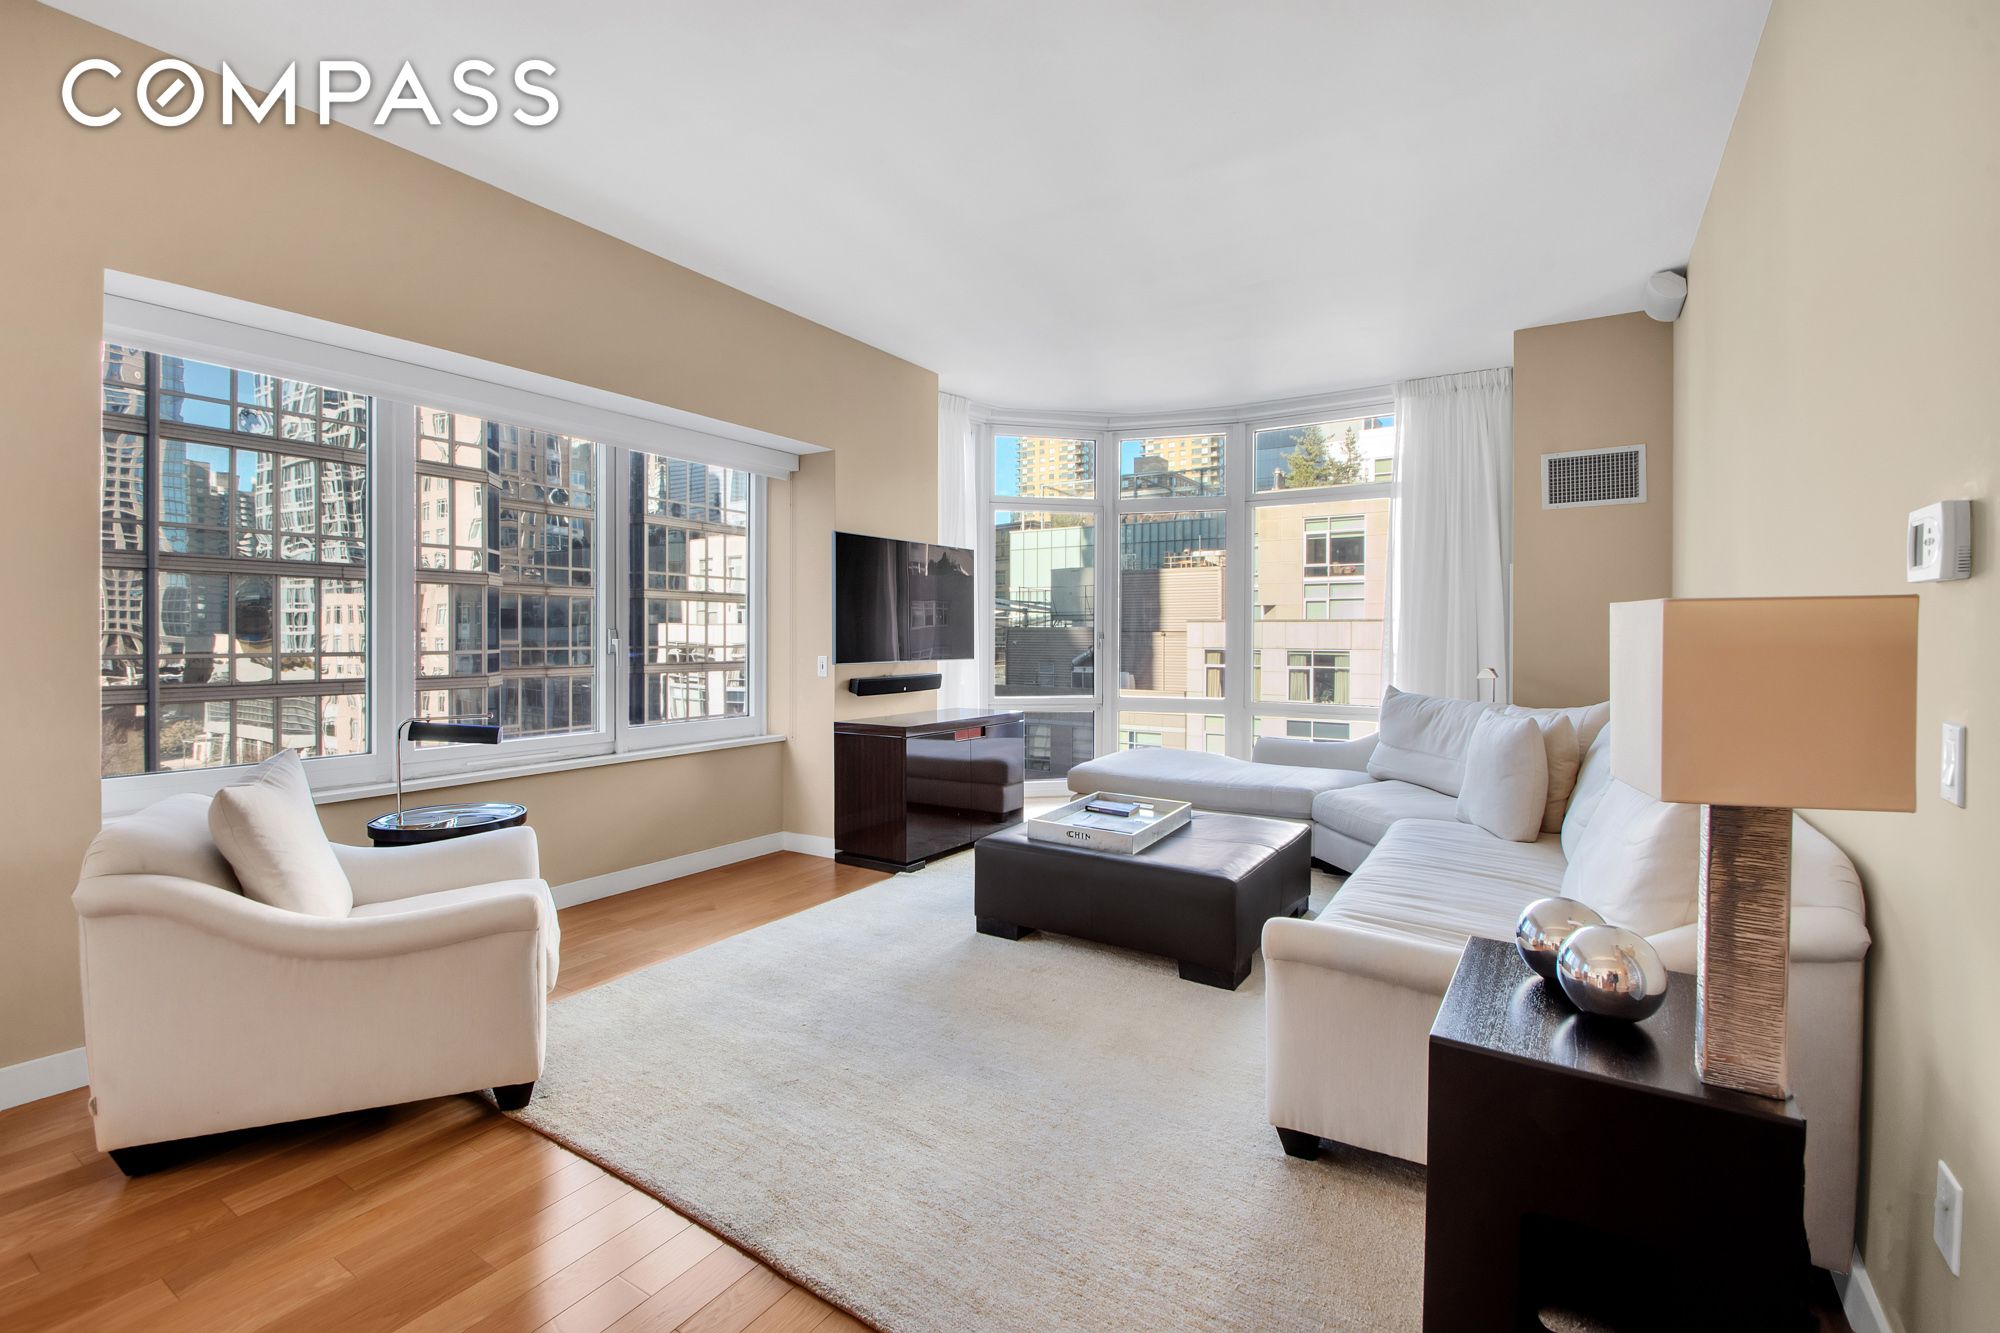 555 West 59th Street 9B, Lincoln Square, Upper West Side, NYC - 3 Bedrooms  
3 Bathrooms  
6 Rooms - 